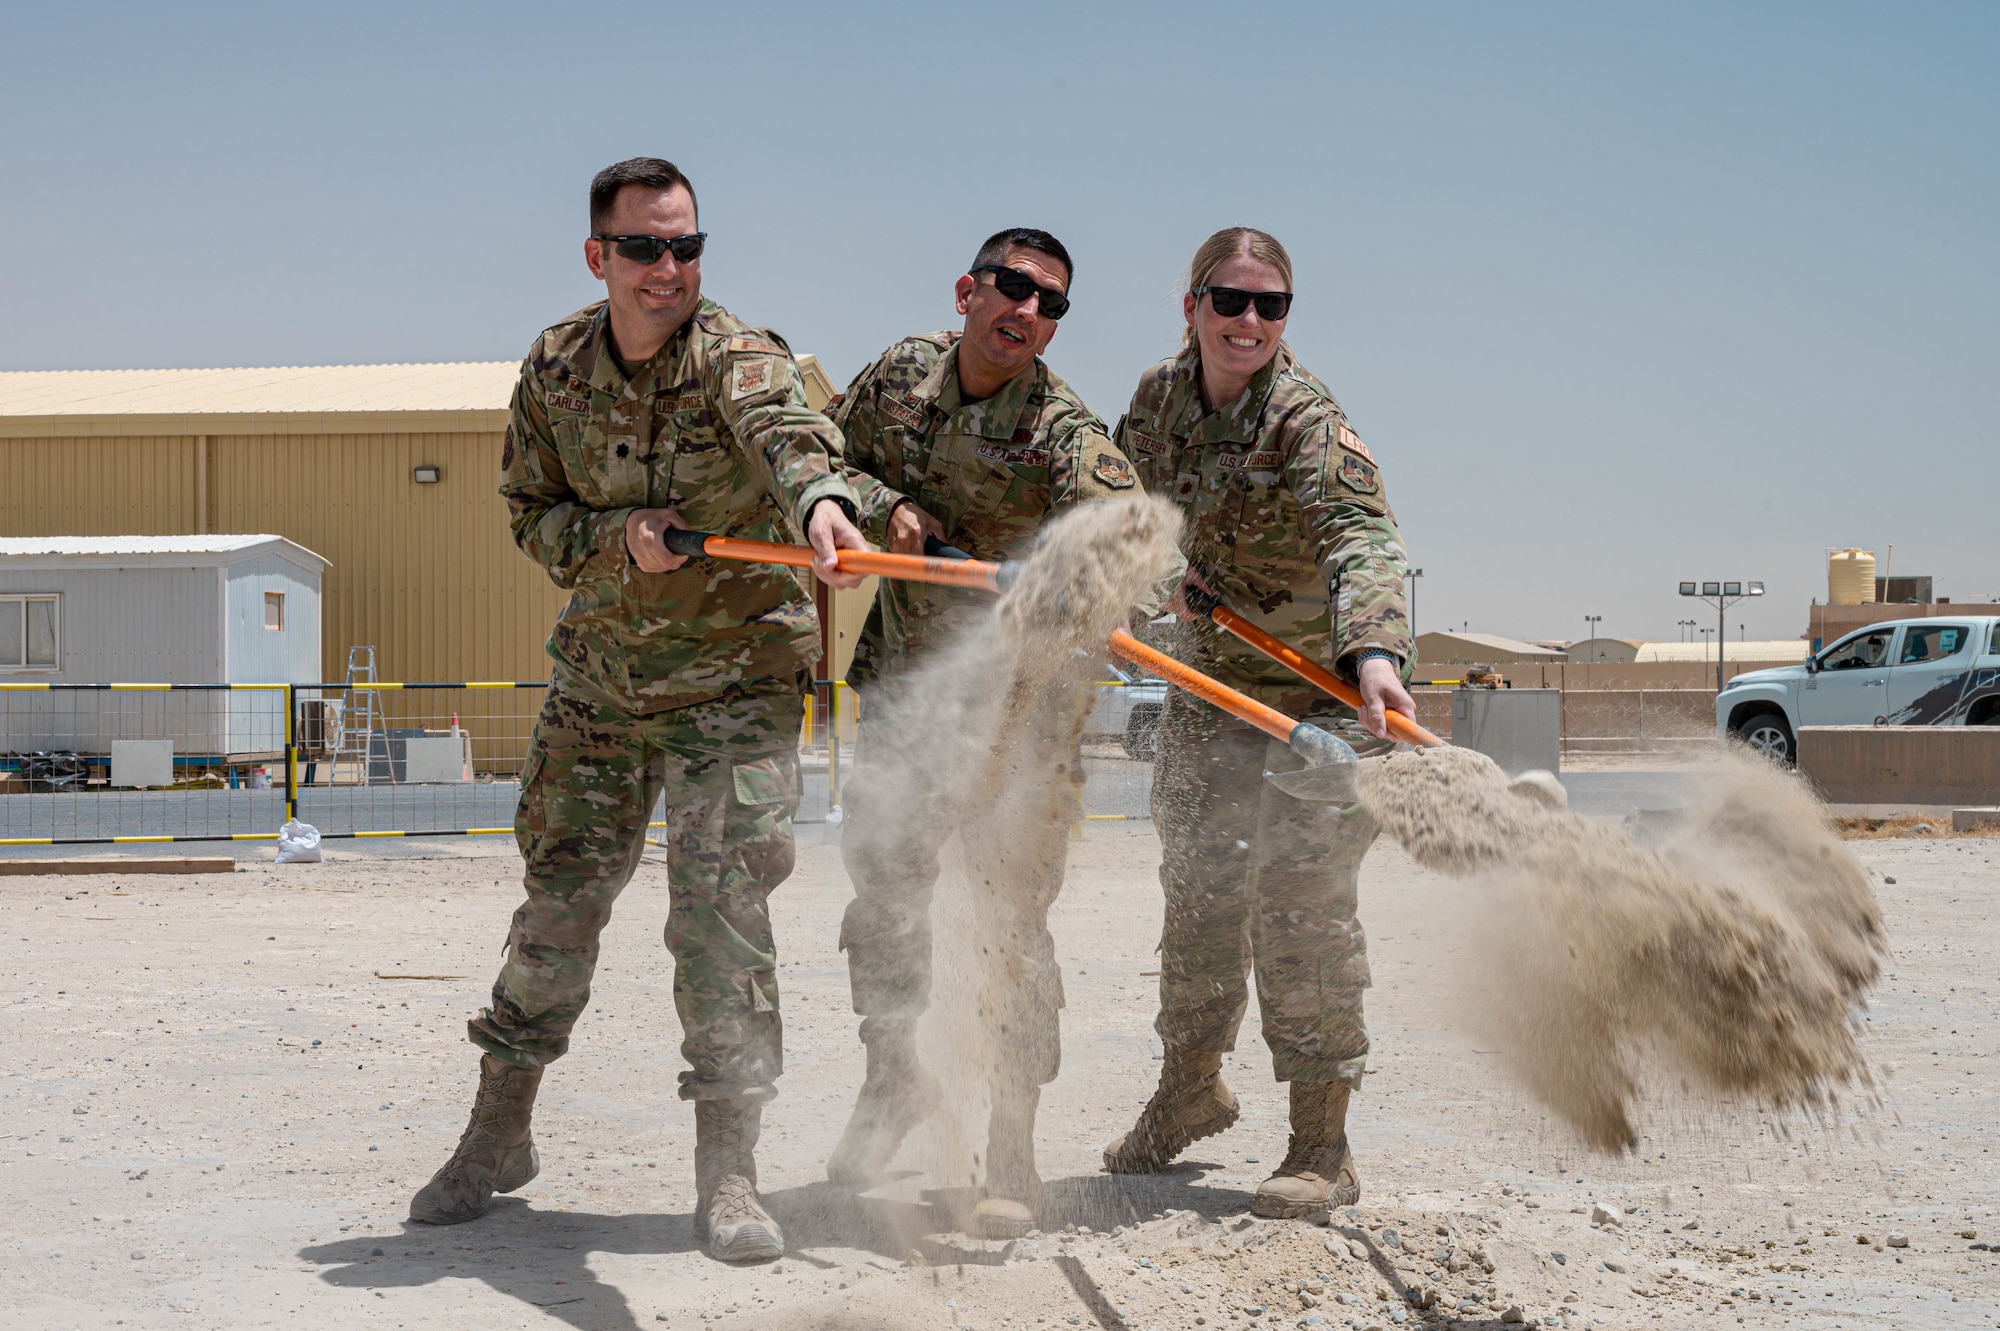 The 386 ELRS held a groundbreaking ceremony for the new aerial port administrative building, leadership gathered to commemorate the first day of construction. The new building will serve multiple functions as it will allow for a centralized location for its previously scattered personnel and a clean slate to allow for innovation at the front end.